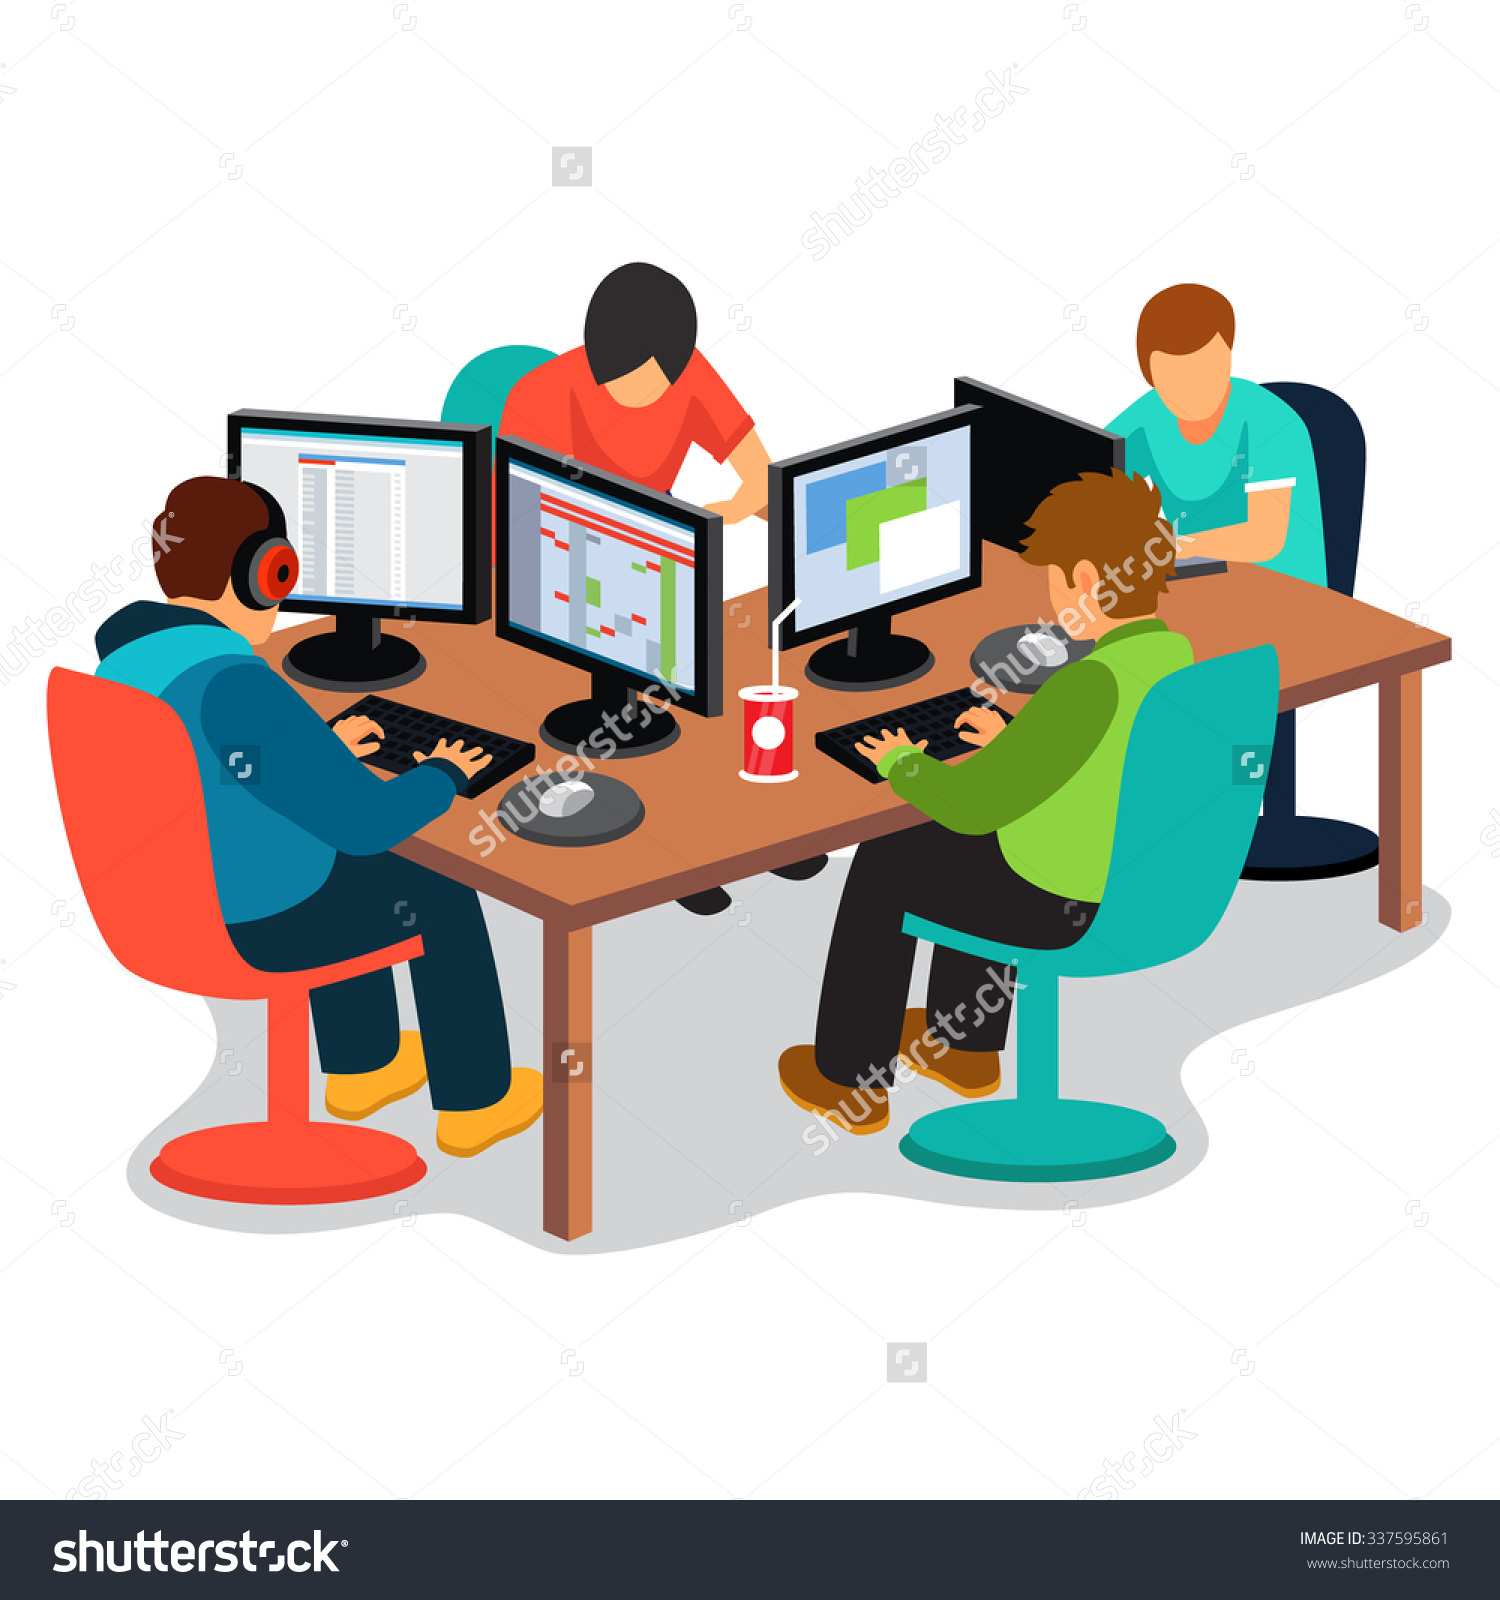 People at Computer Clip Art.